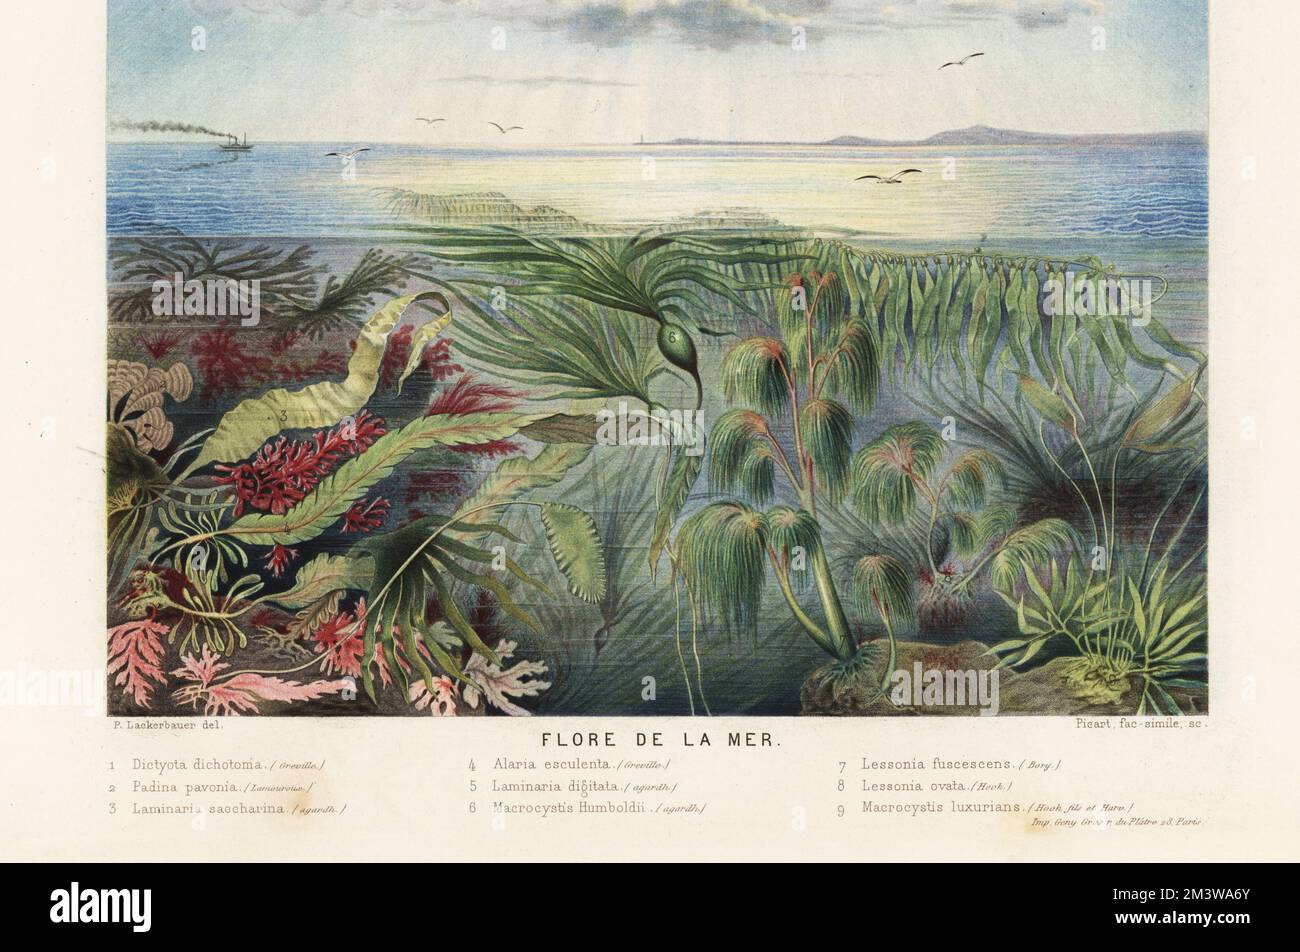 Types of seaweed, kelp and algae in the ocean. Flore de la mer. Brown algae, Dictyota dichotoma 1, peacock's tail, Padina pavonica 2, sugar kelp, Saccharina latissima 3, winged kelp, Alaria esculenta 4, oarwood, Laminaria digitata 5, giant kelp, Macrocystis pyrifera 6,9, and Lessonia flavicans 7,8. Chromolithograph by Pierre Lackerbauer from Alfred Fredol’s Le Monde de la Mer, the World of the Sea, edited by Olivier Fredol, Librairie Hachette et. Cie., Paris, 1881. Alfred Fredol was the pseudonym of French zoologist and botanist Alfred Moquin-Tandon, 1804-1863. Stock Photo